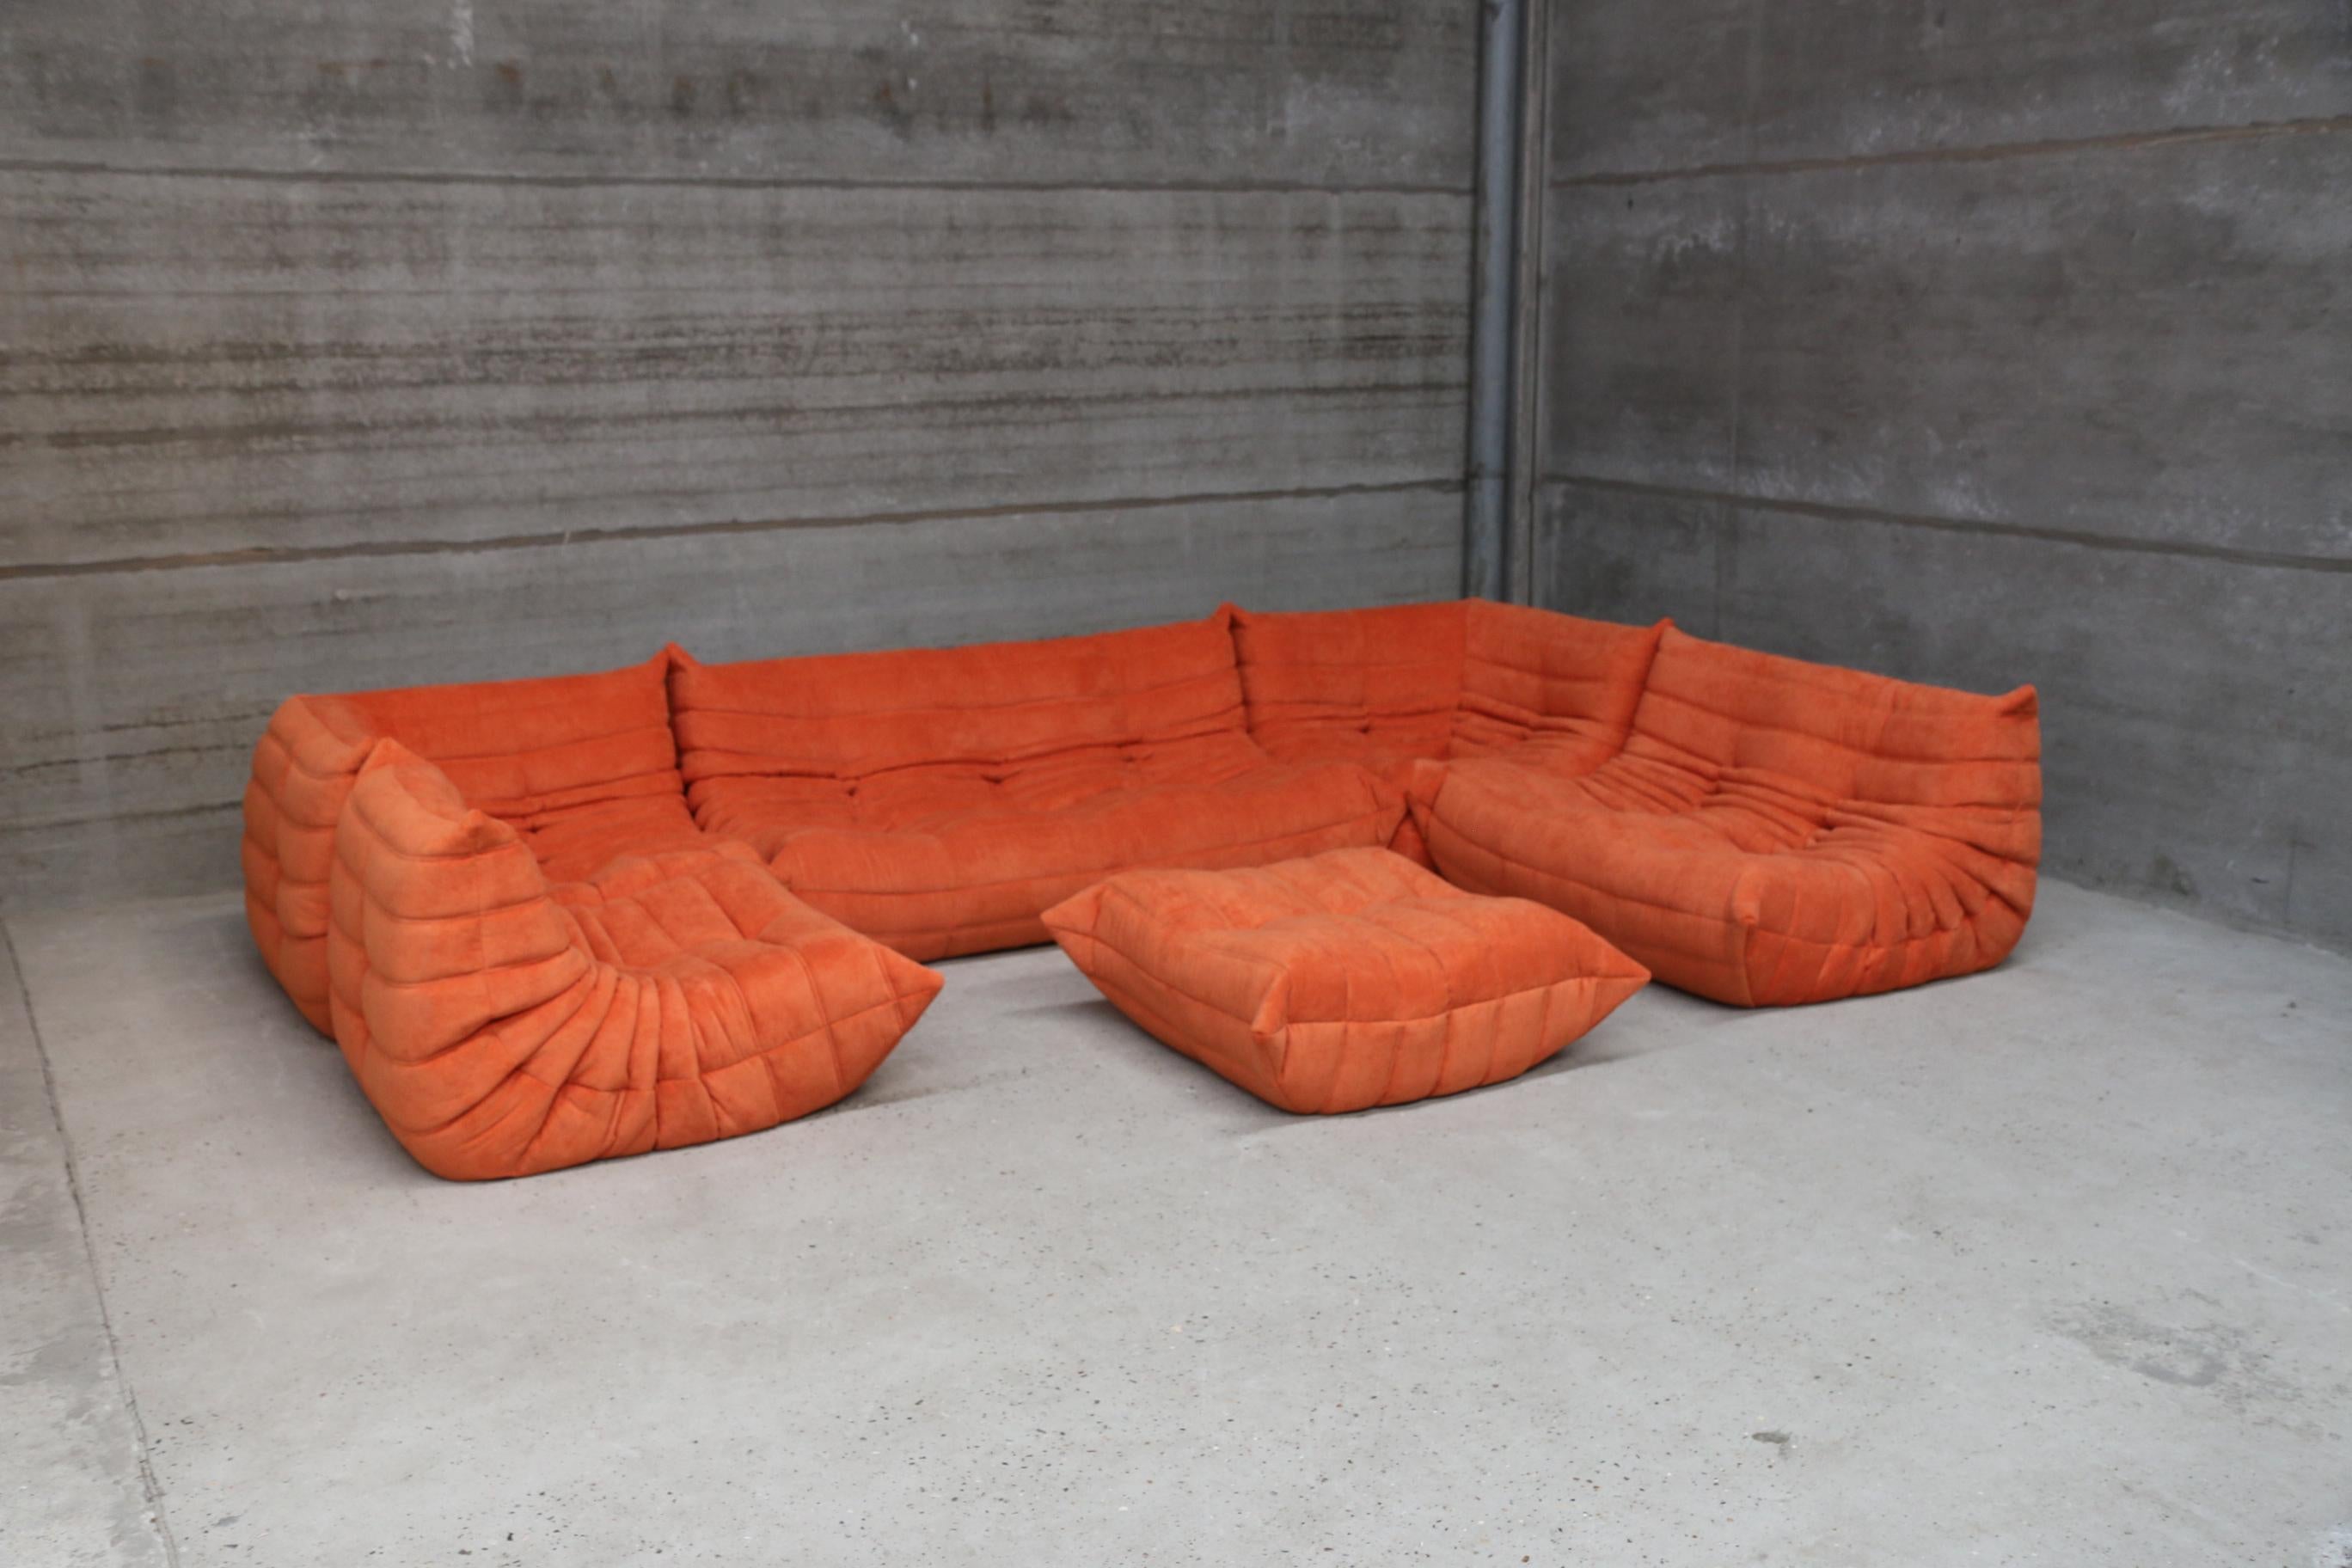 Iconic French vintage sofa design mid-century sofa set, beautifully reupholstered with our stain free, washable and very durable 